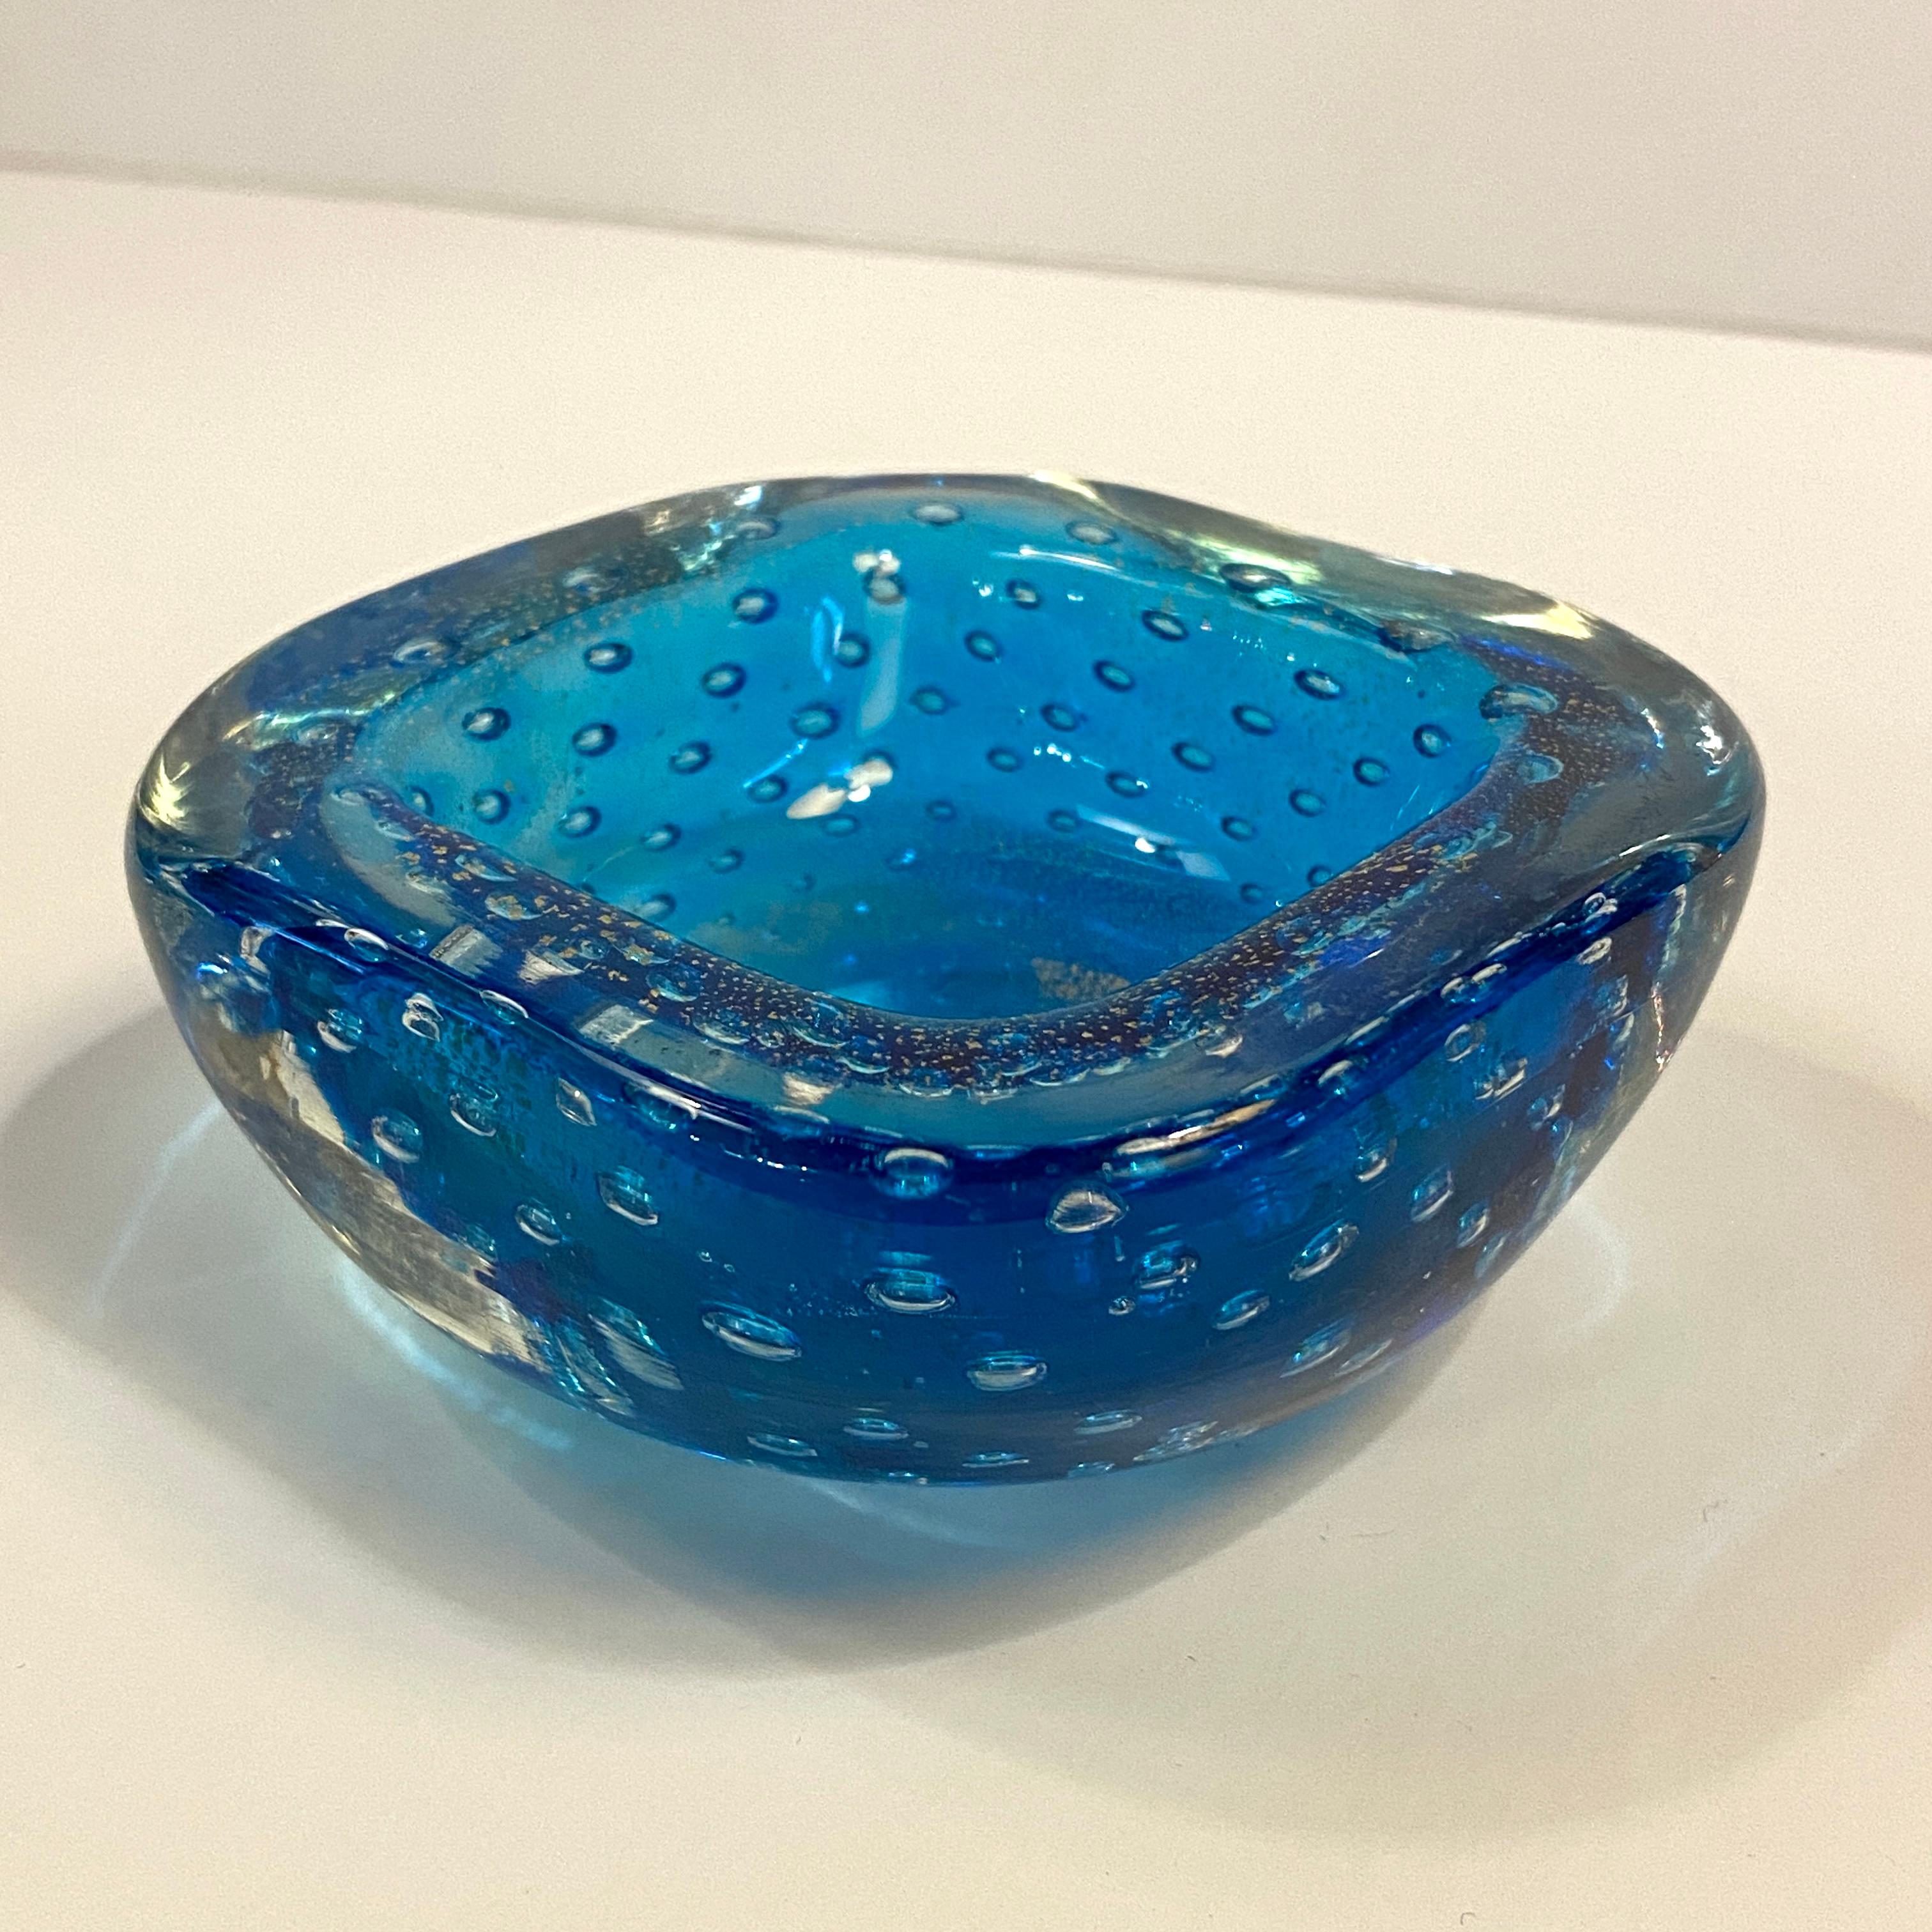 Petite, midcentury modern, Italian Murano, sapphire blue, art glass dish features the controlled bubble technique called bullicante throughout with a gold fleck detail on the top surface. 